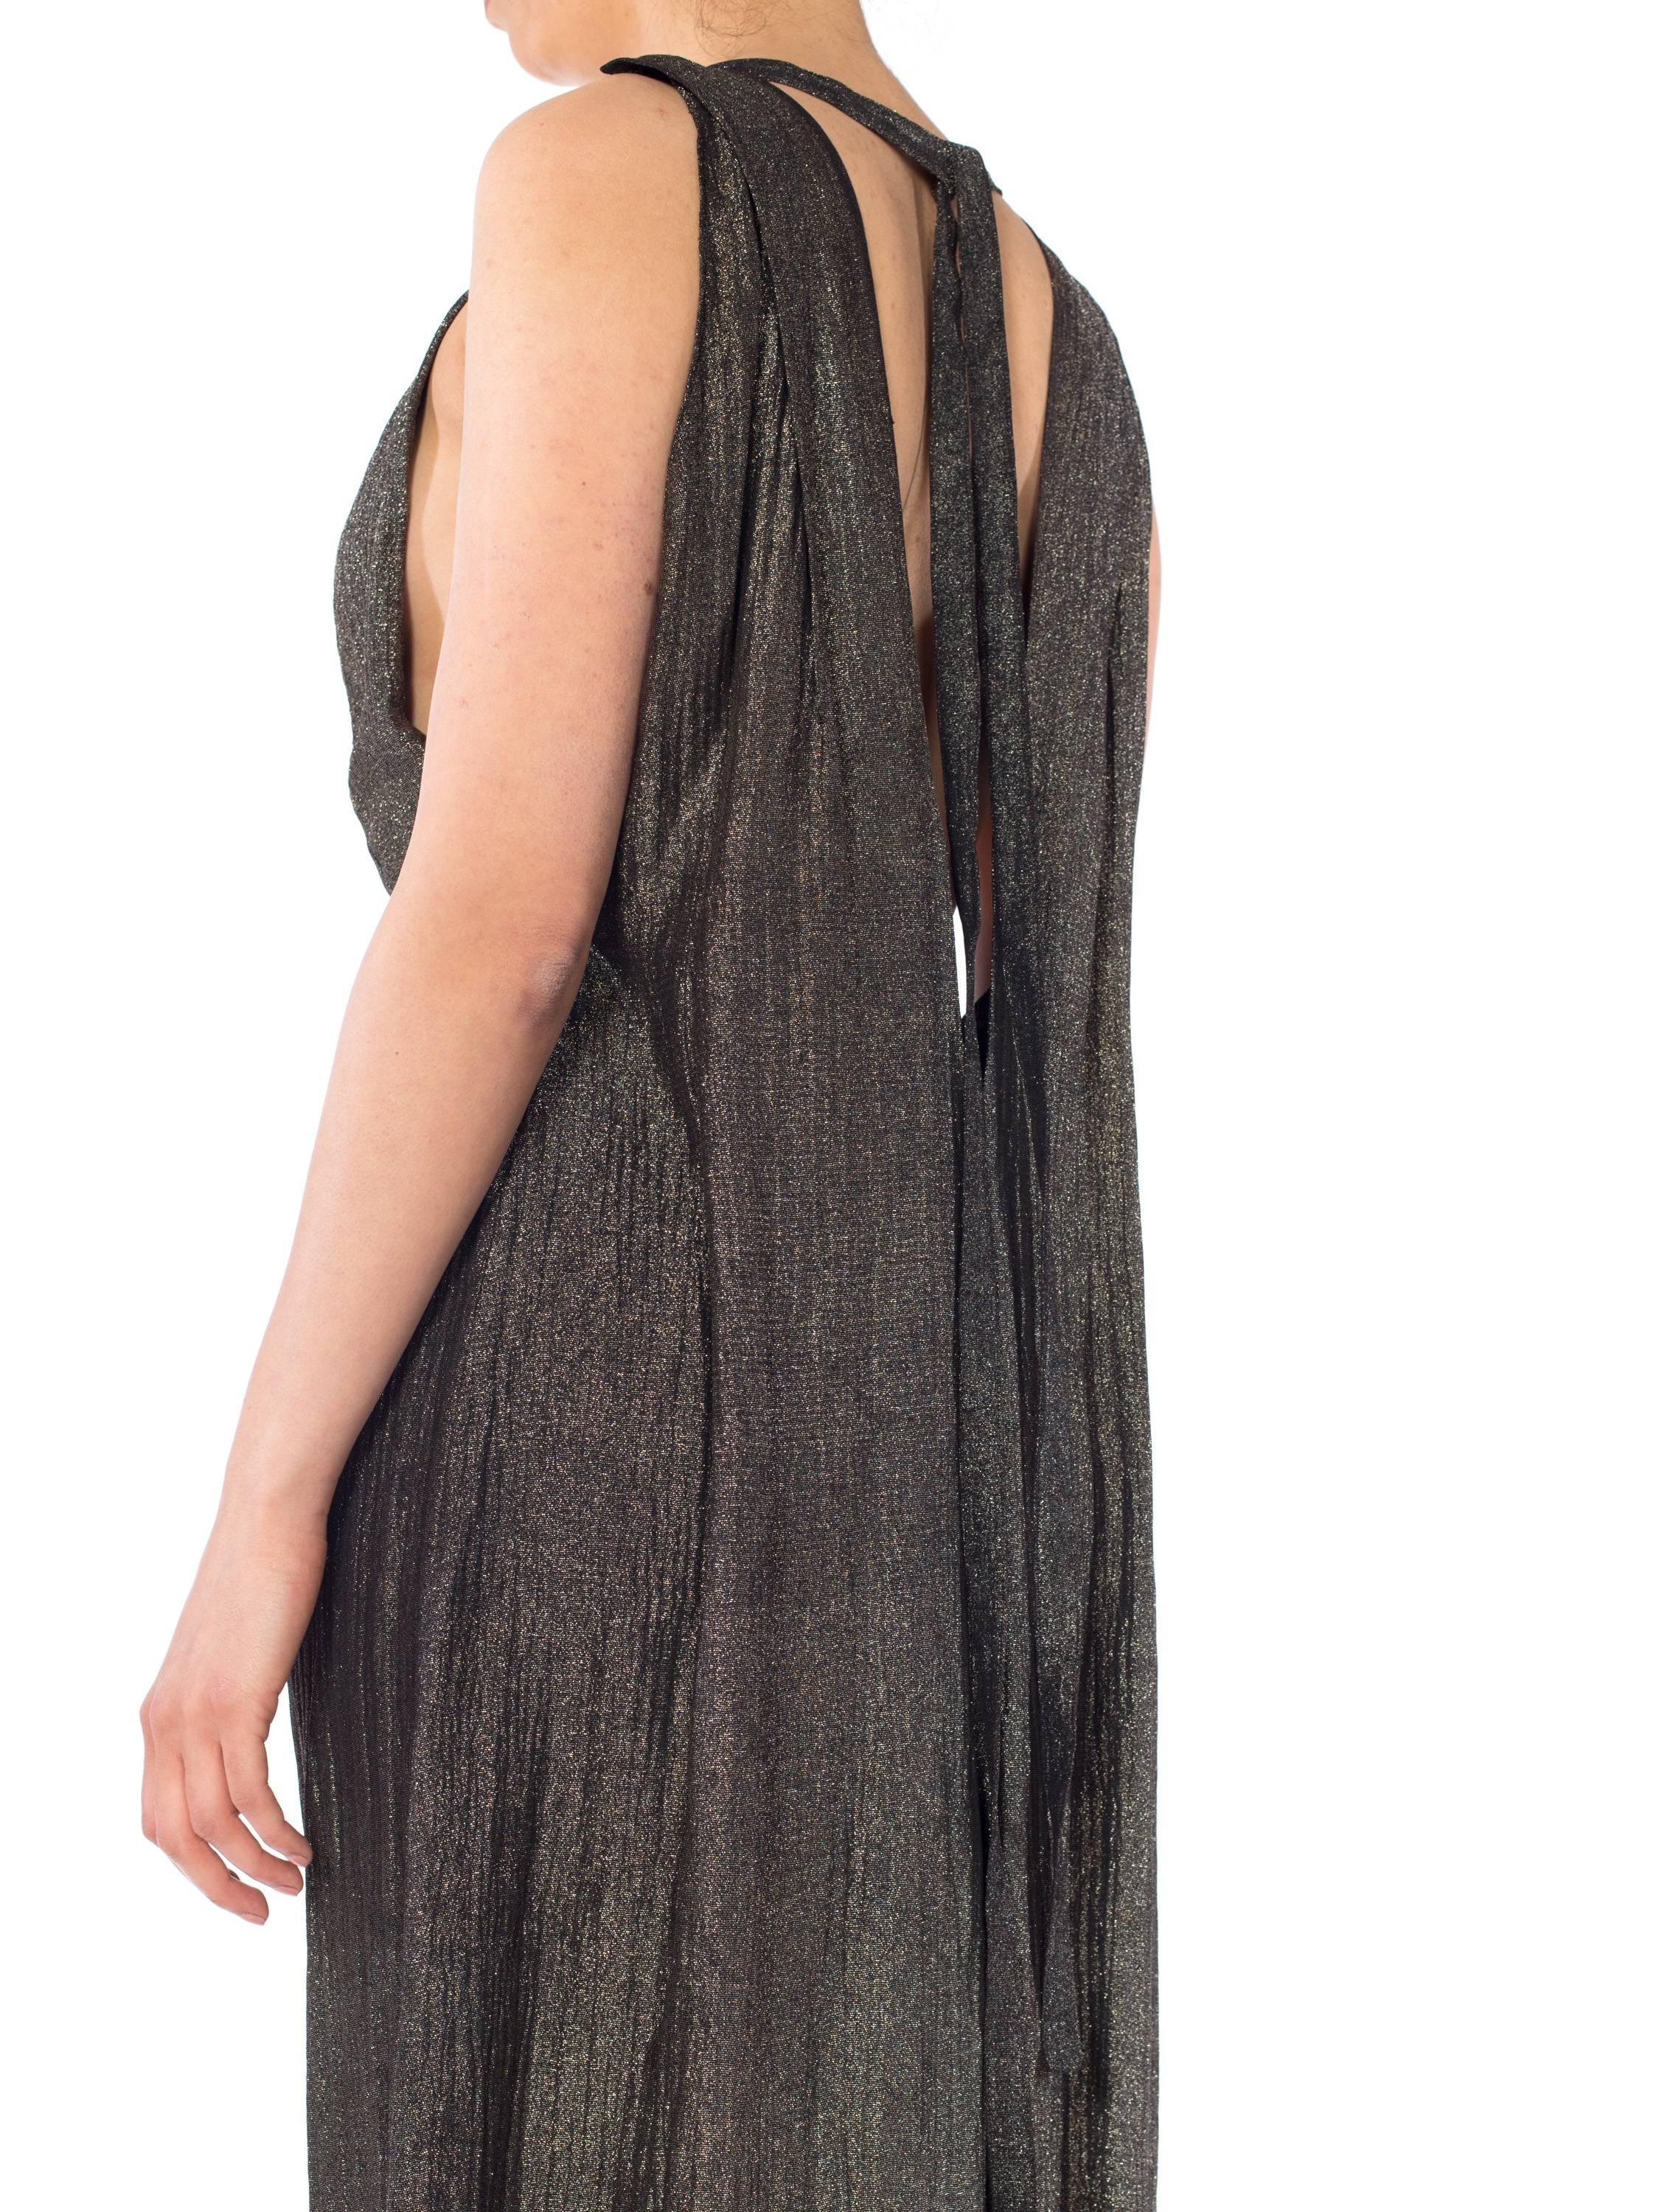 MORPHEW COLLECTION Black & Gold Antique Patina Silk Lamé  Gown With Low Back An For Sale 4